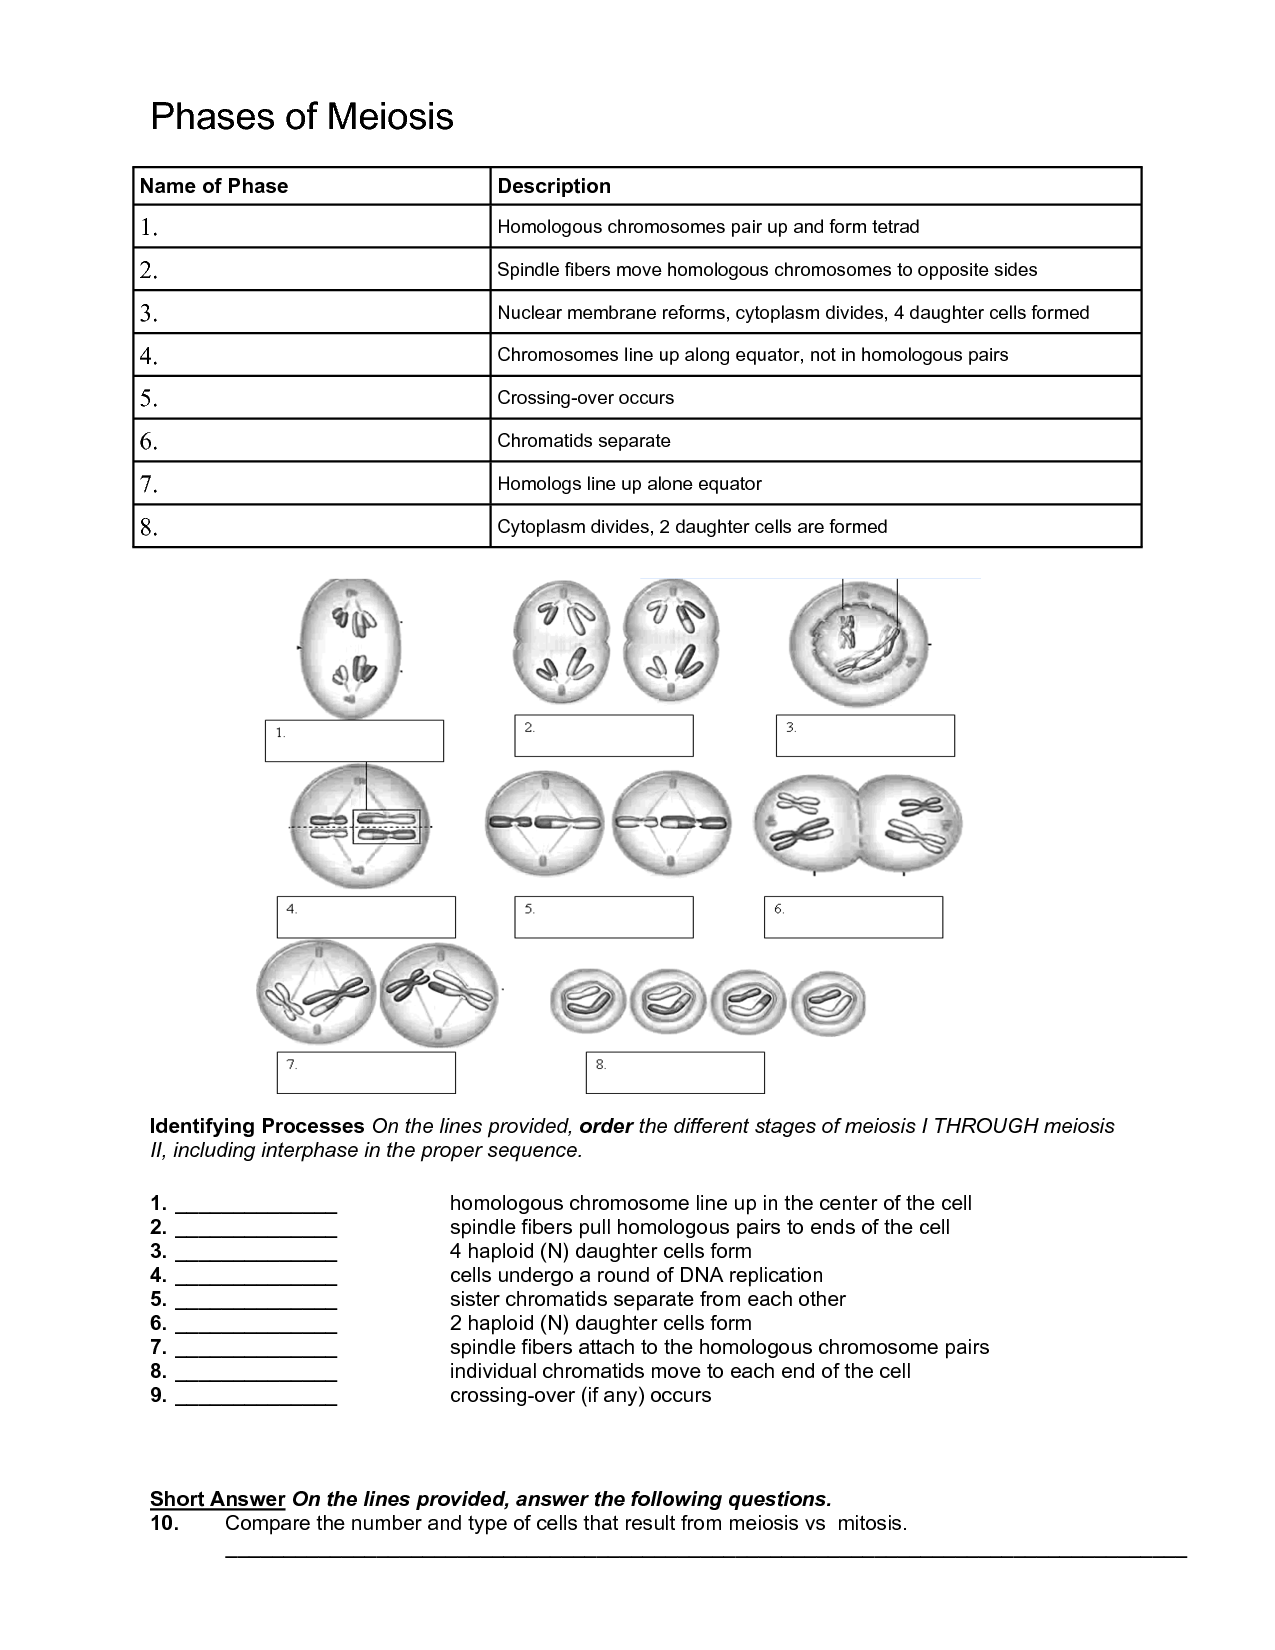 18-best-images-of-mitosis-worksheet-answer-key-chart-cell-cycle-and